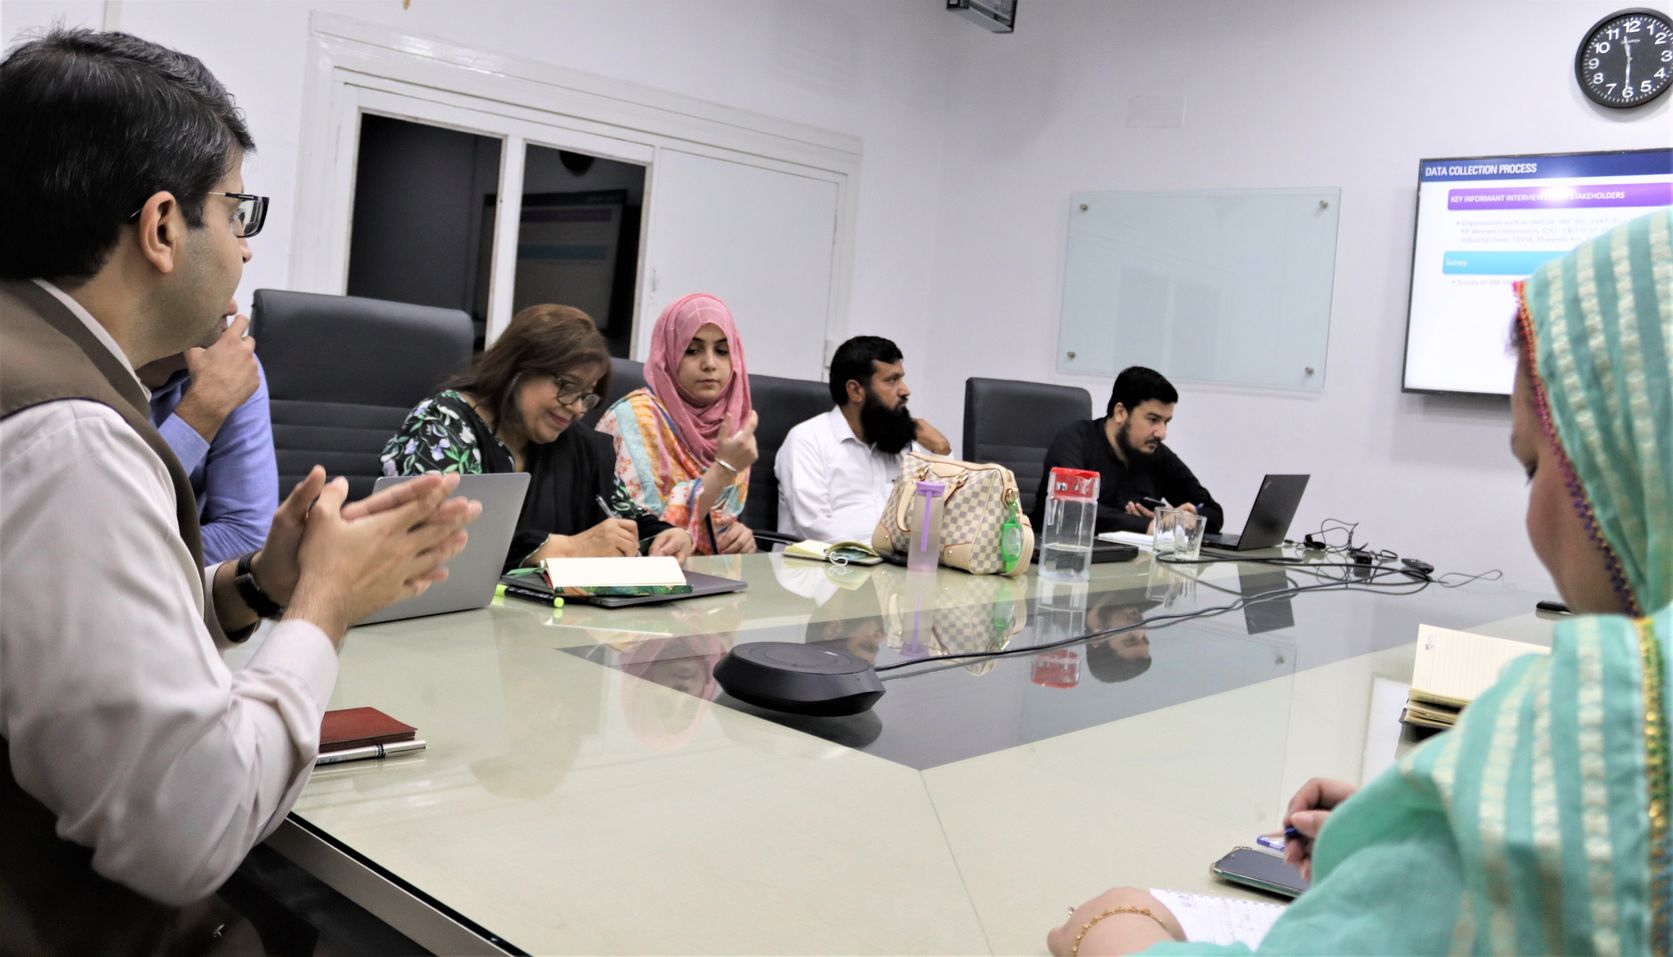 A review meeting on scoping exercise for economic development of women-owned or women managed firms in Greater Western Peshawar area and Khyber District